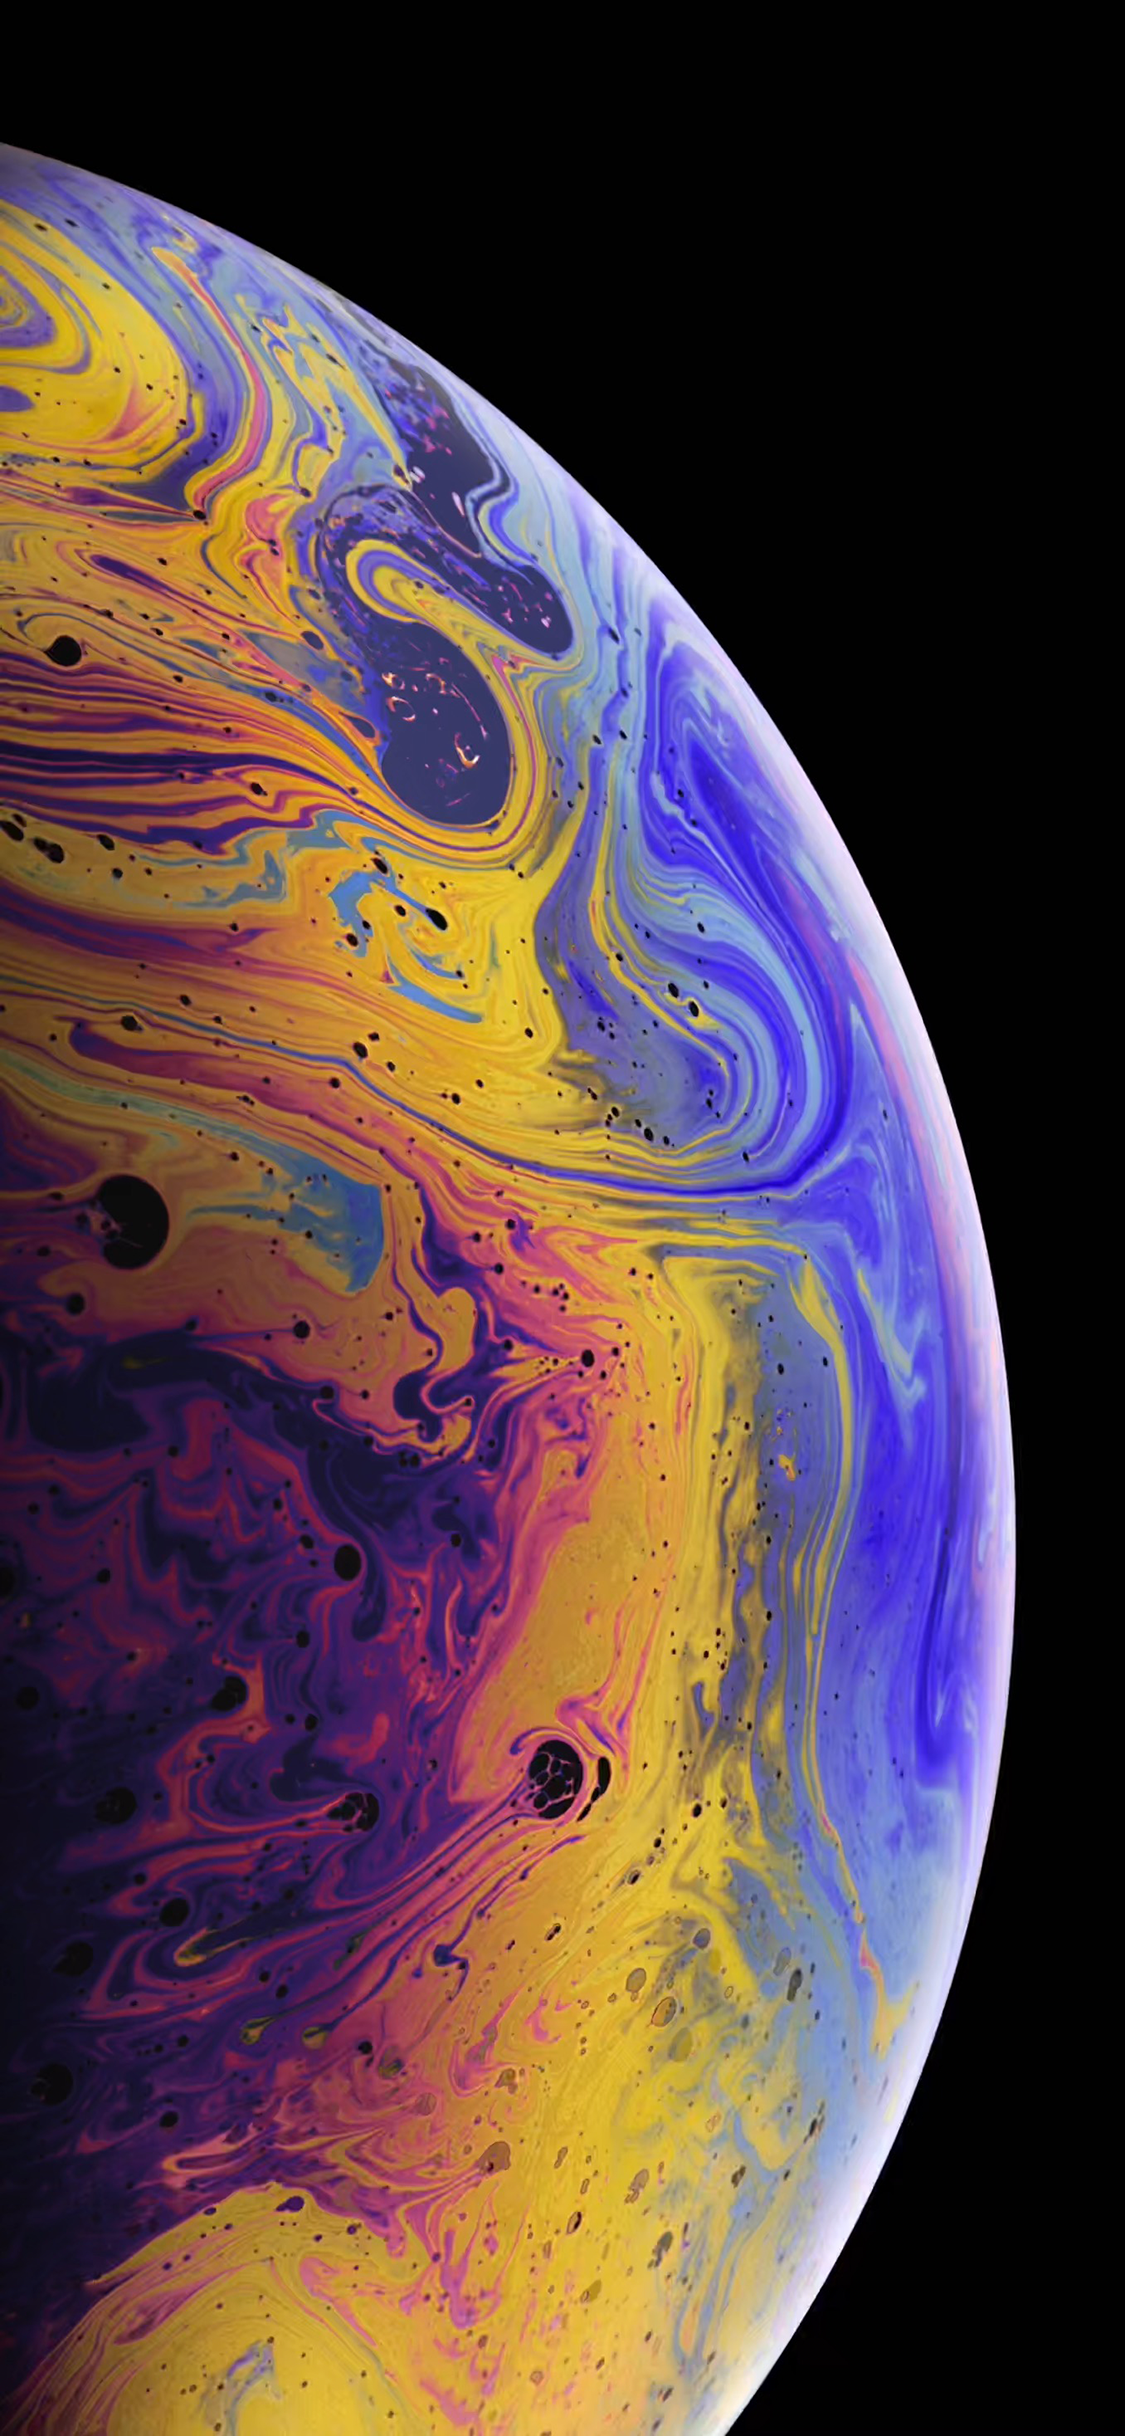 iPhone XS Wallpaper - White ( Event) - Wallpapers Central